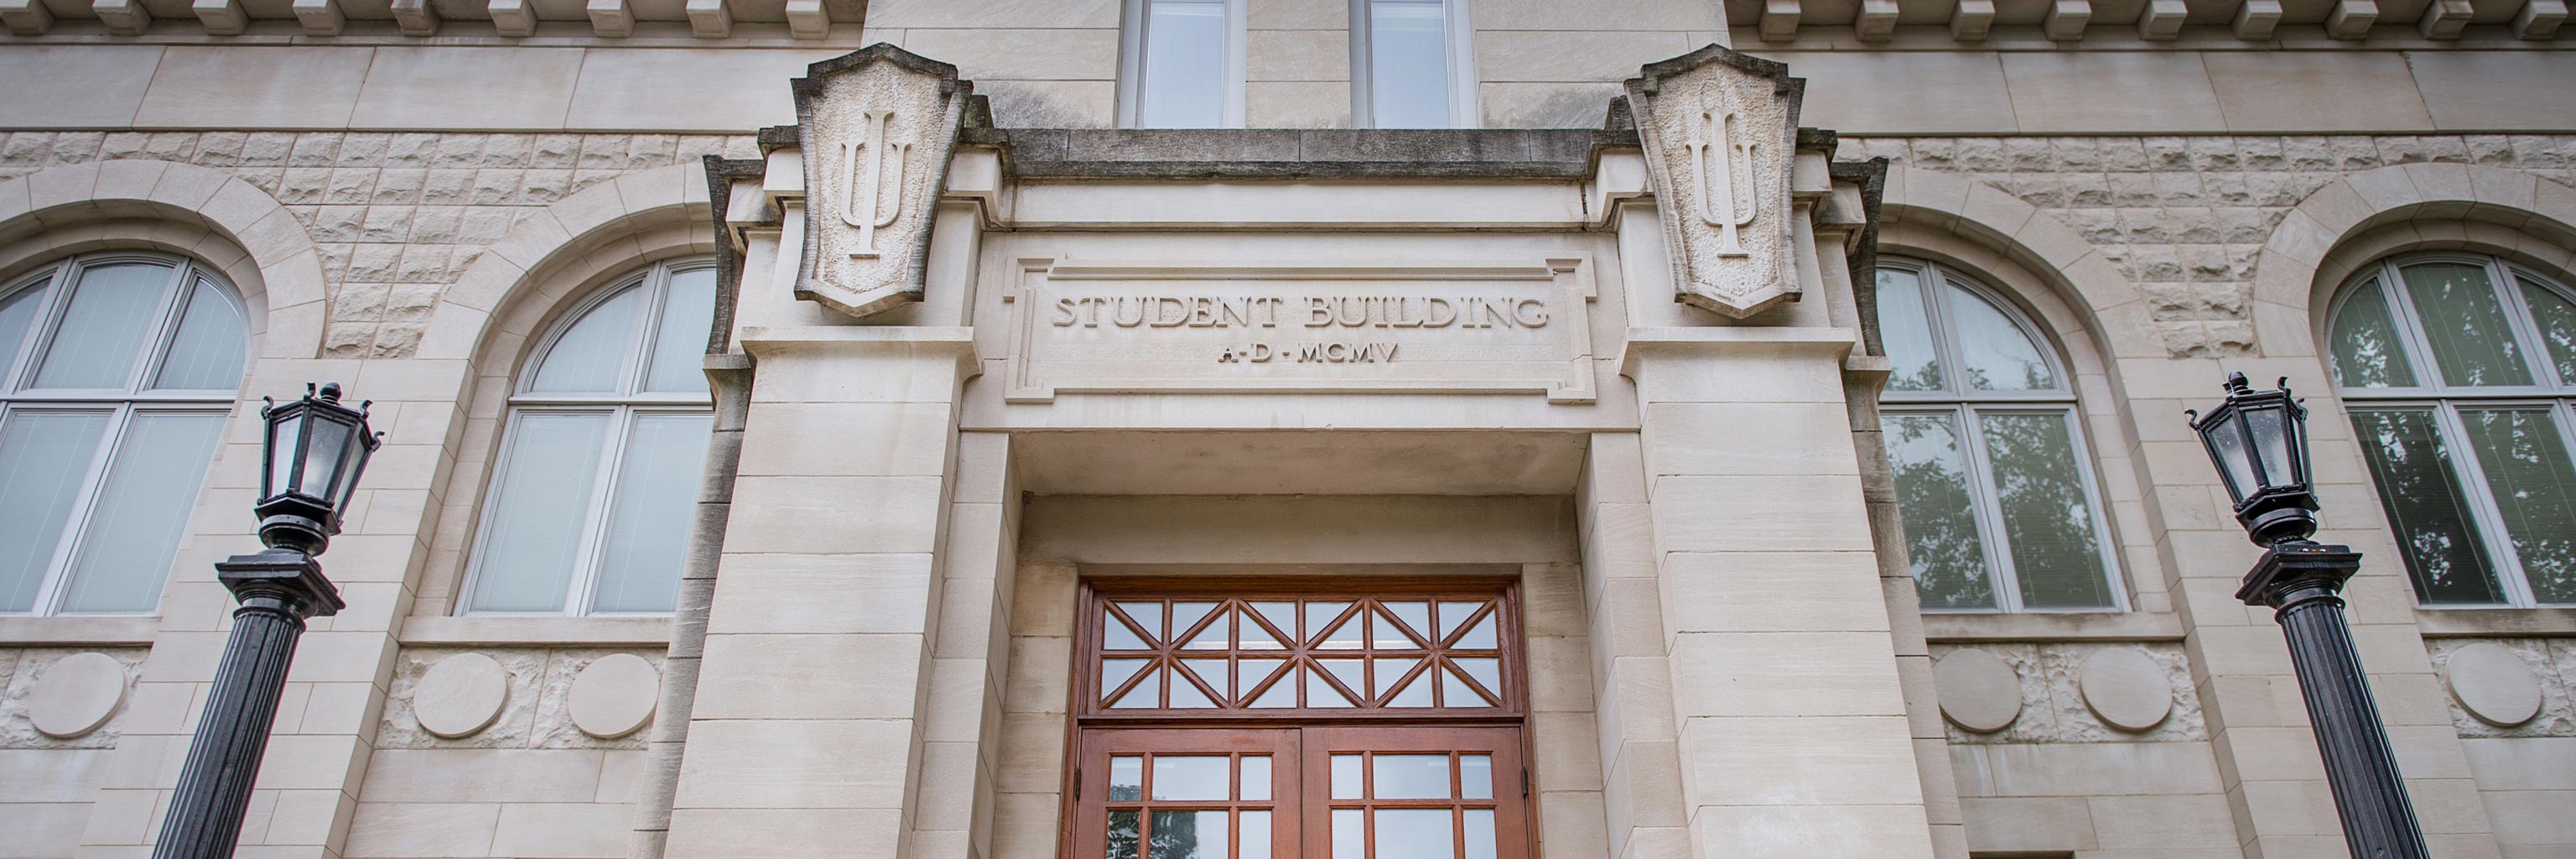 Main entrance to the IU Student Building